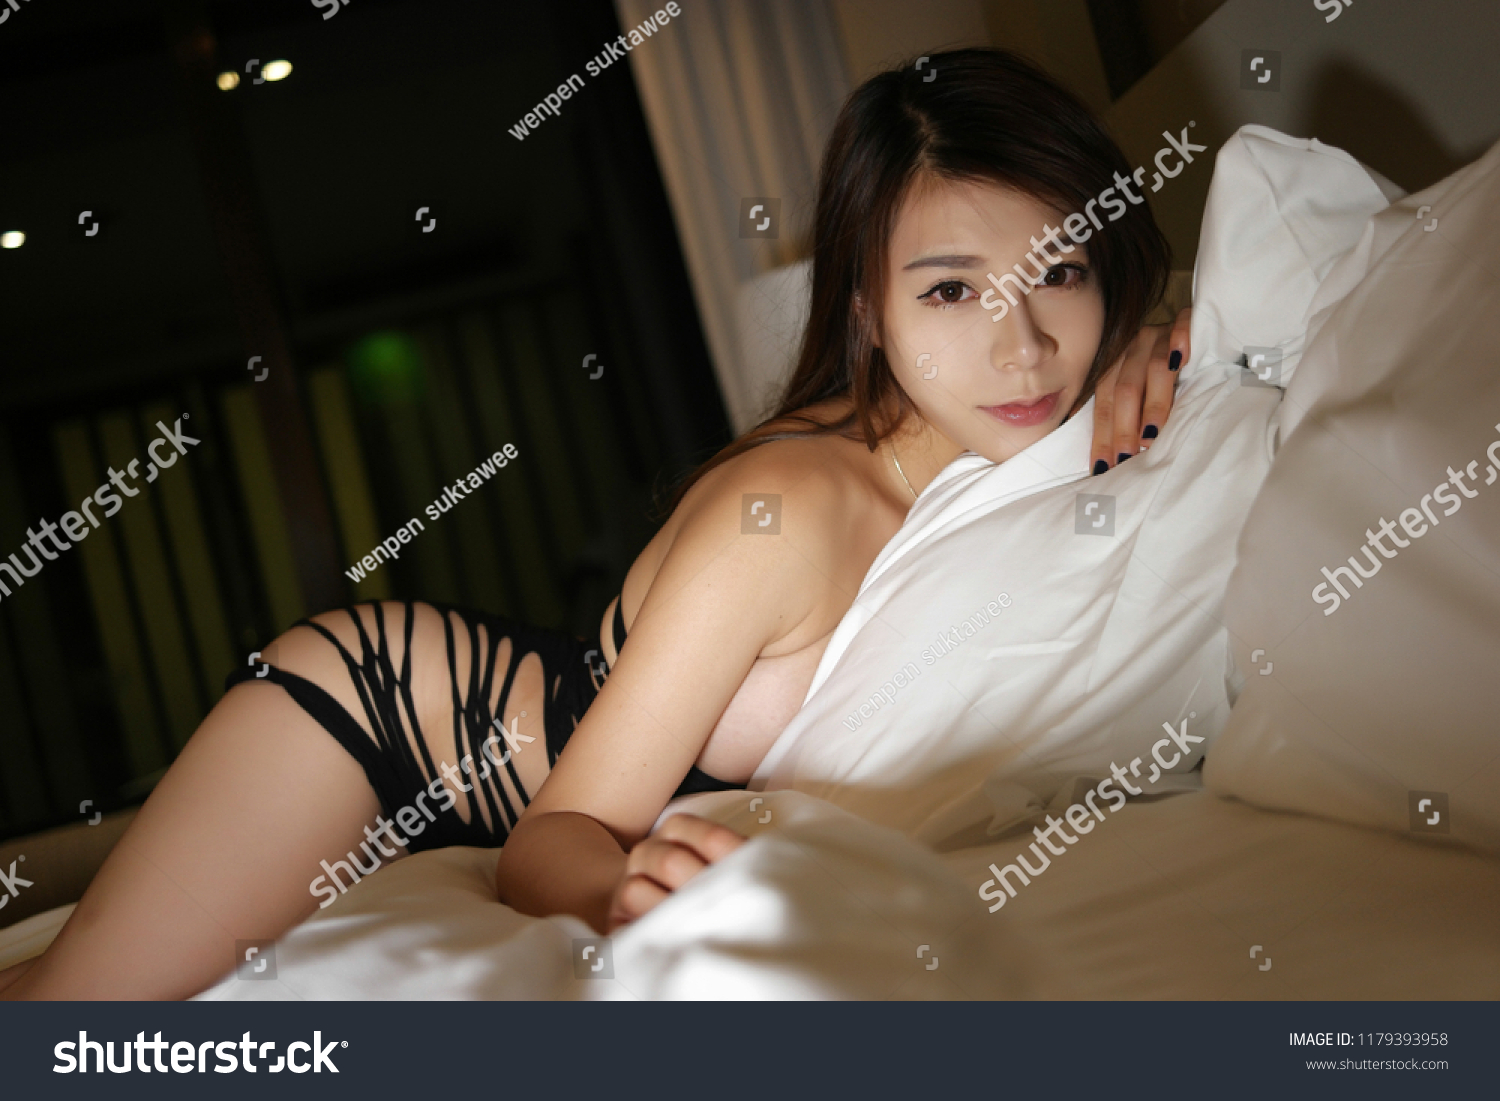 Asian nude girl pictures - Sex photo